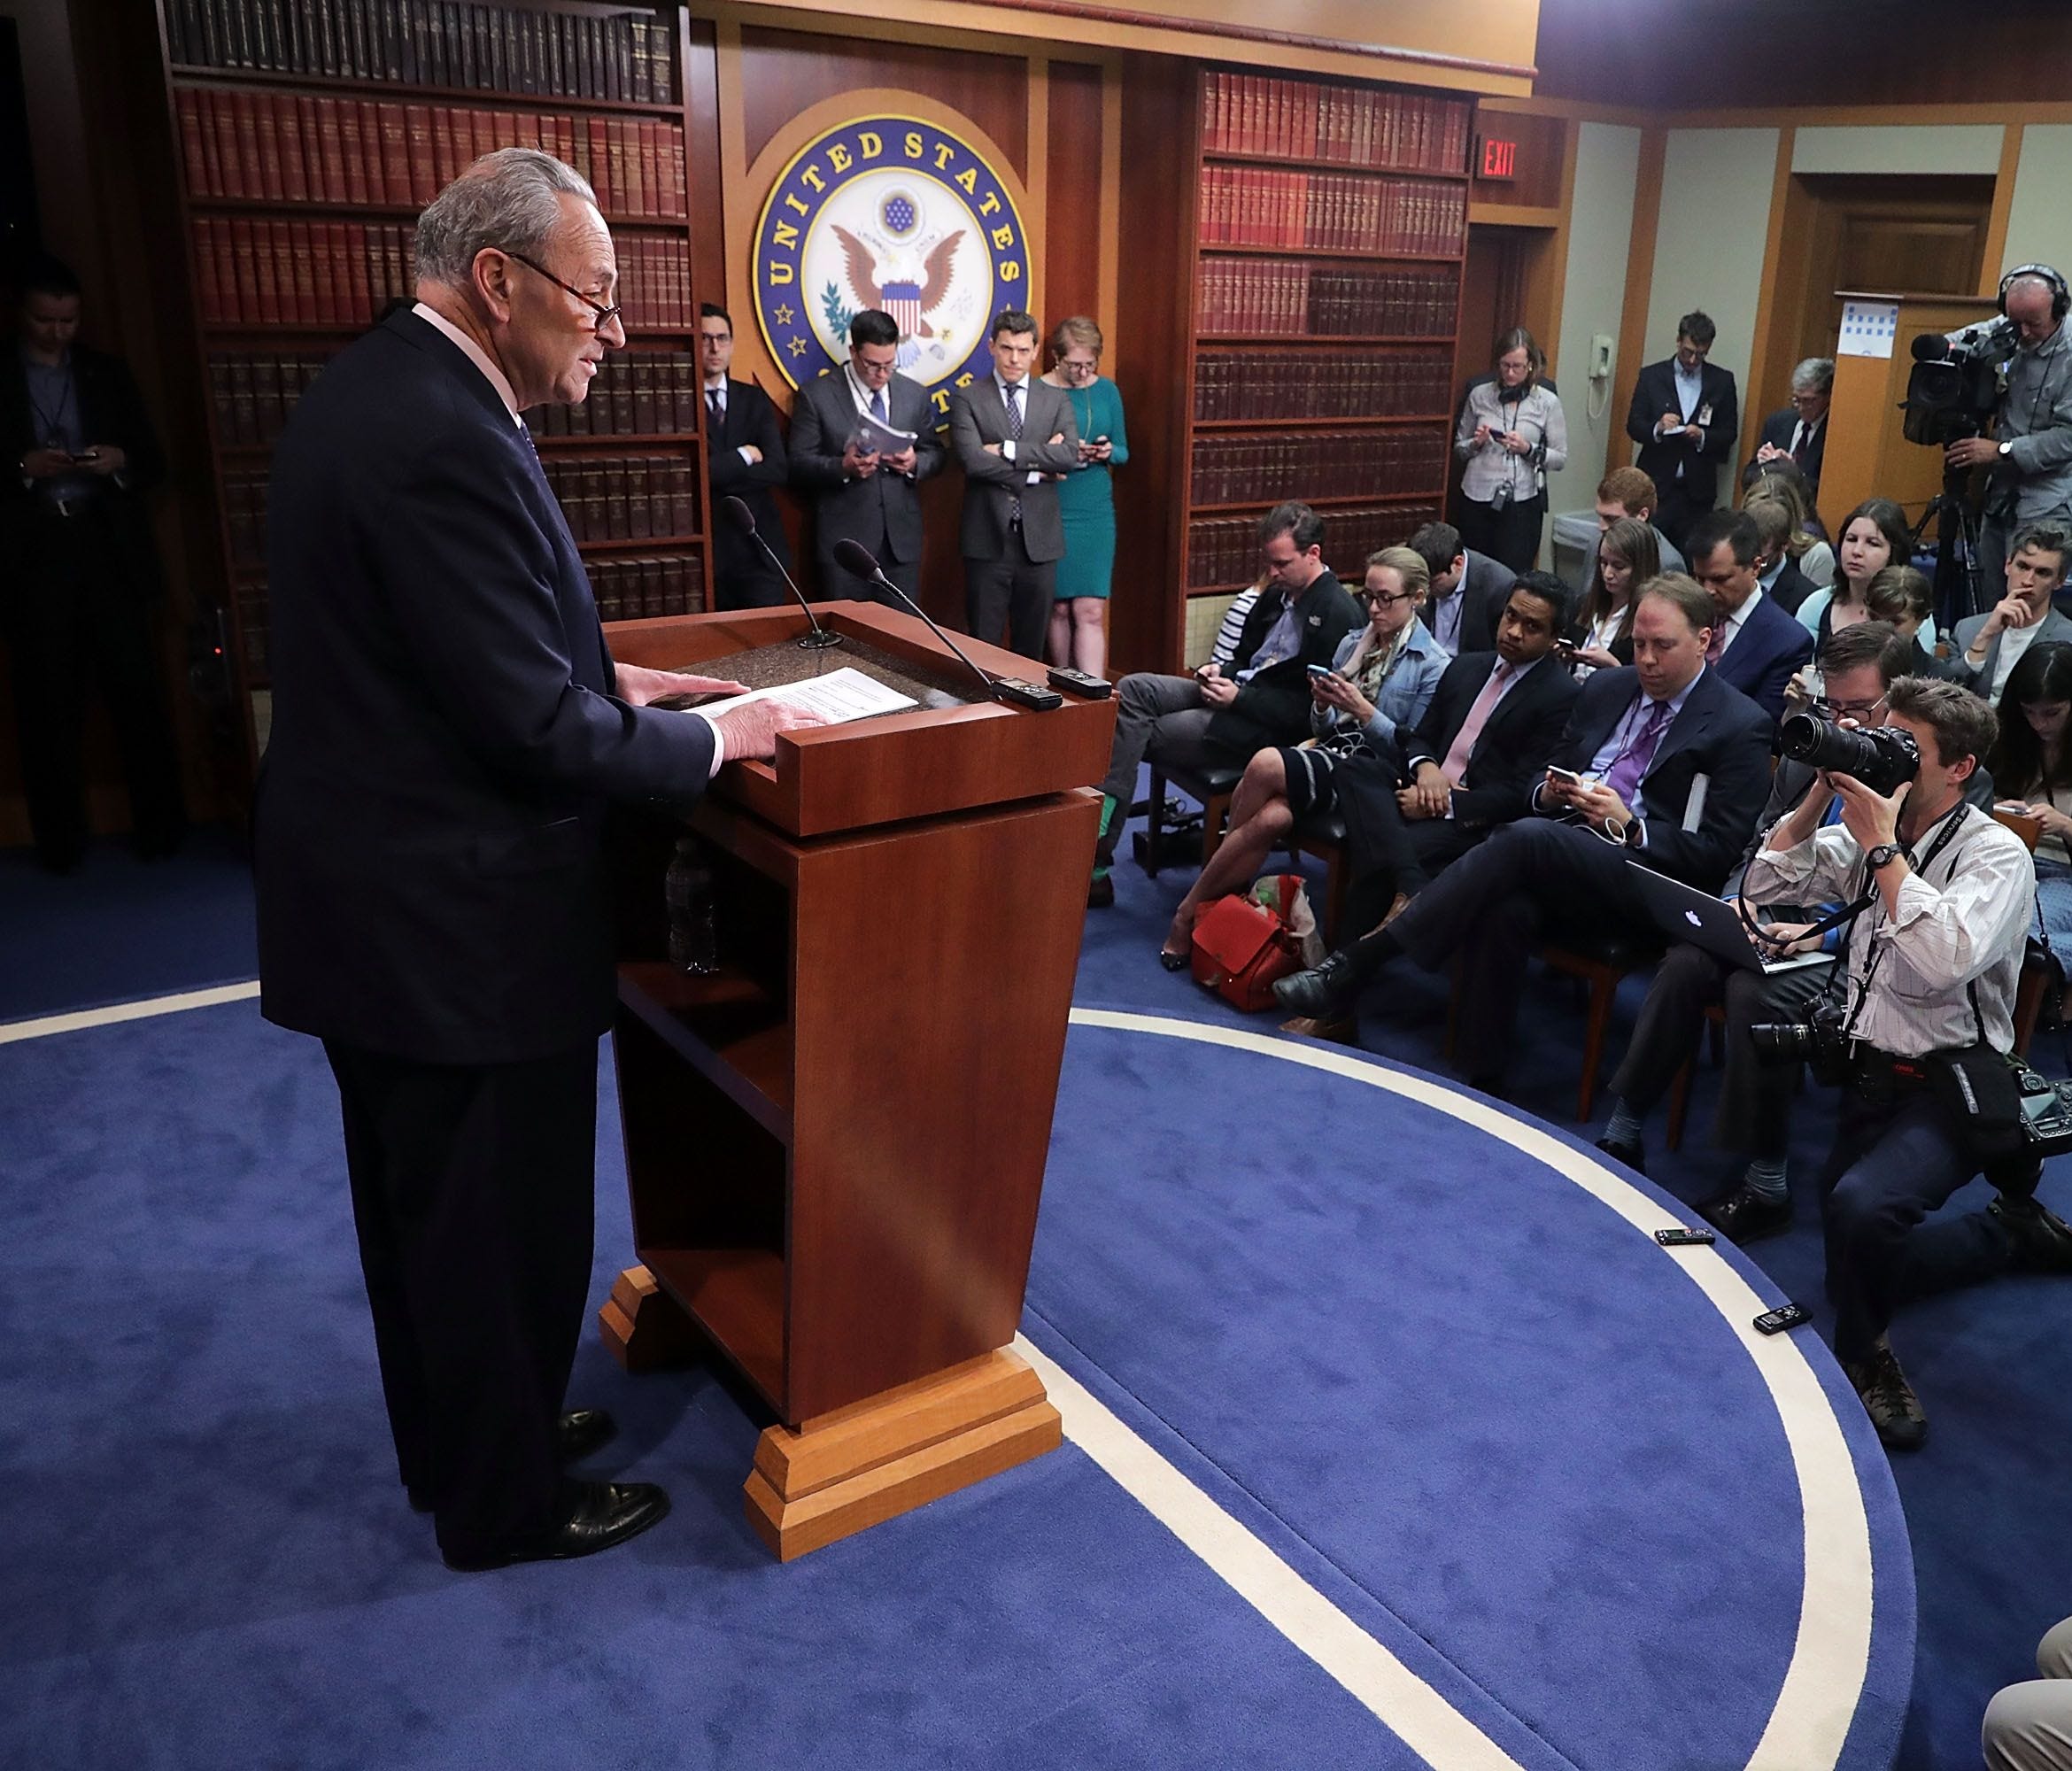 Senate Minority Leader Chuck Schumer holds a news conference at the U.S. Capitol following the firing of FBI Director James Comey on May 9, 2017.